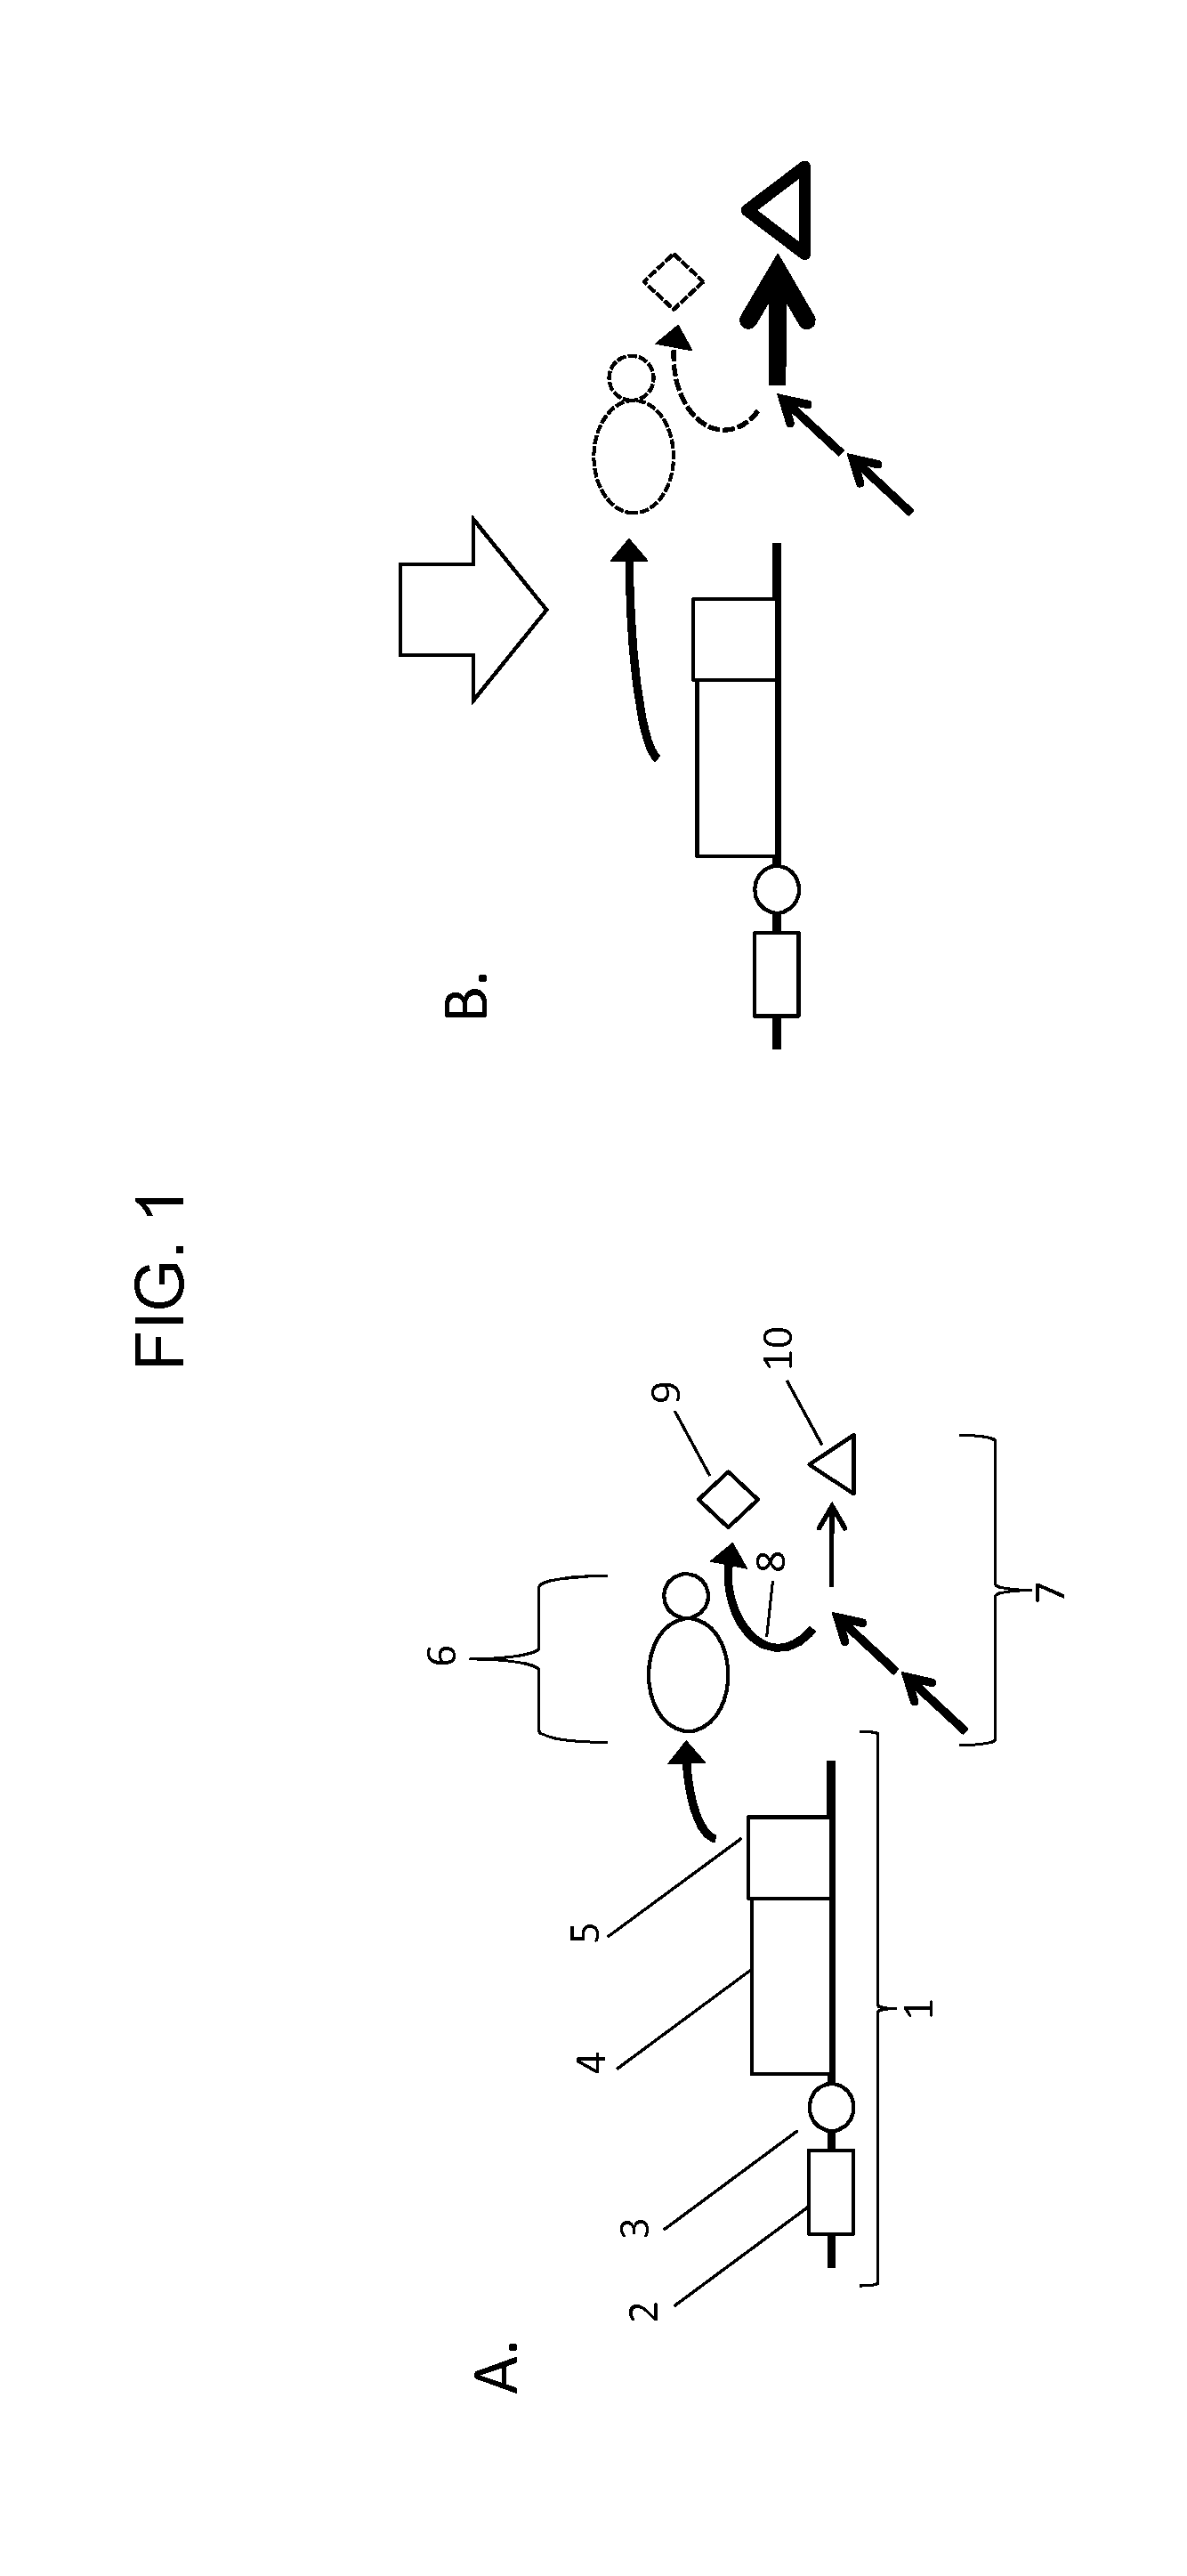 Methods and Molecules for Yield Improvement Involving Metabolic Engineering